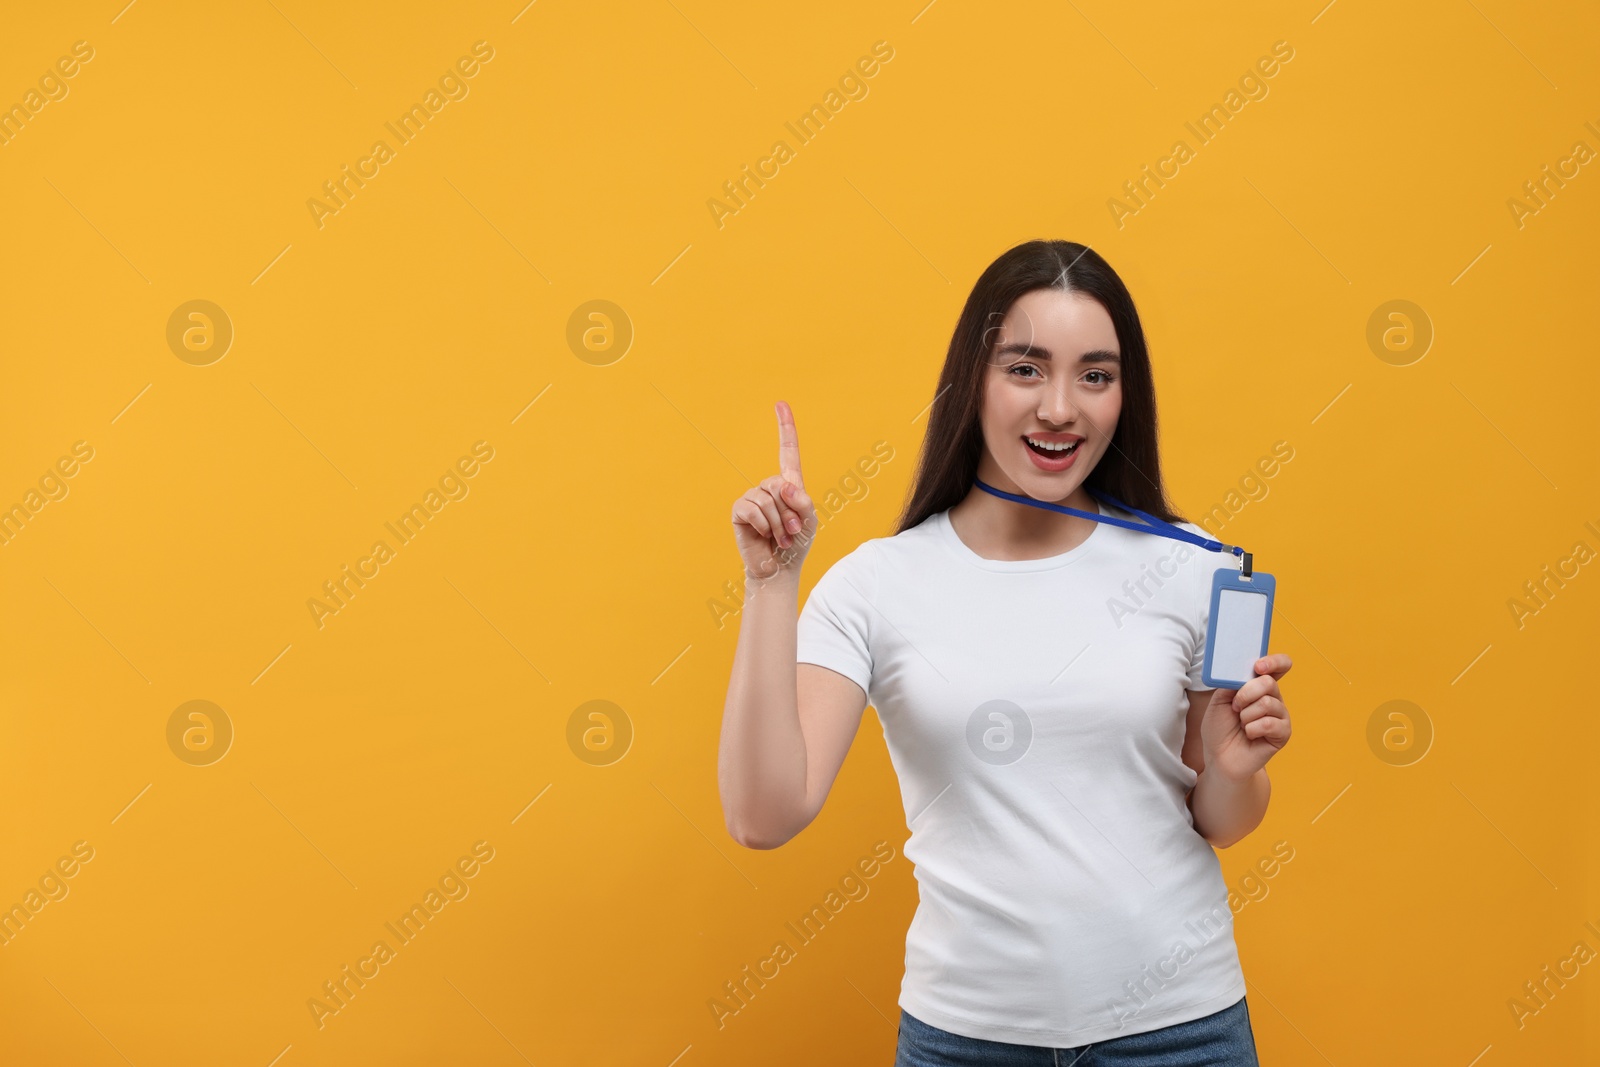 Photo of Smiling woman holding vip pass badge and pointing at something on orange background. Space for text